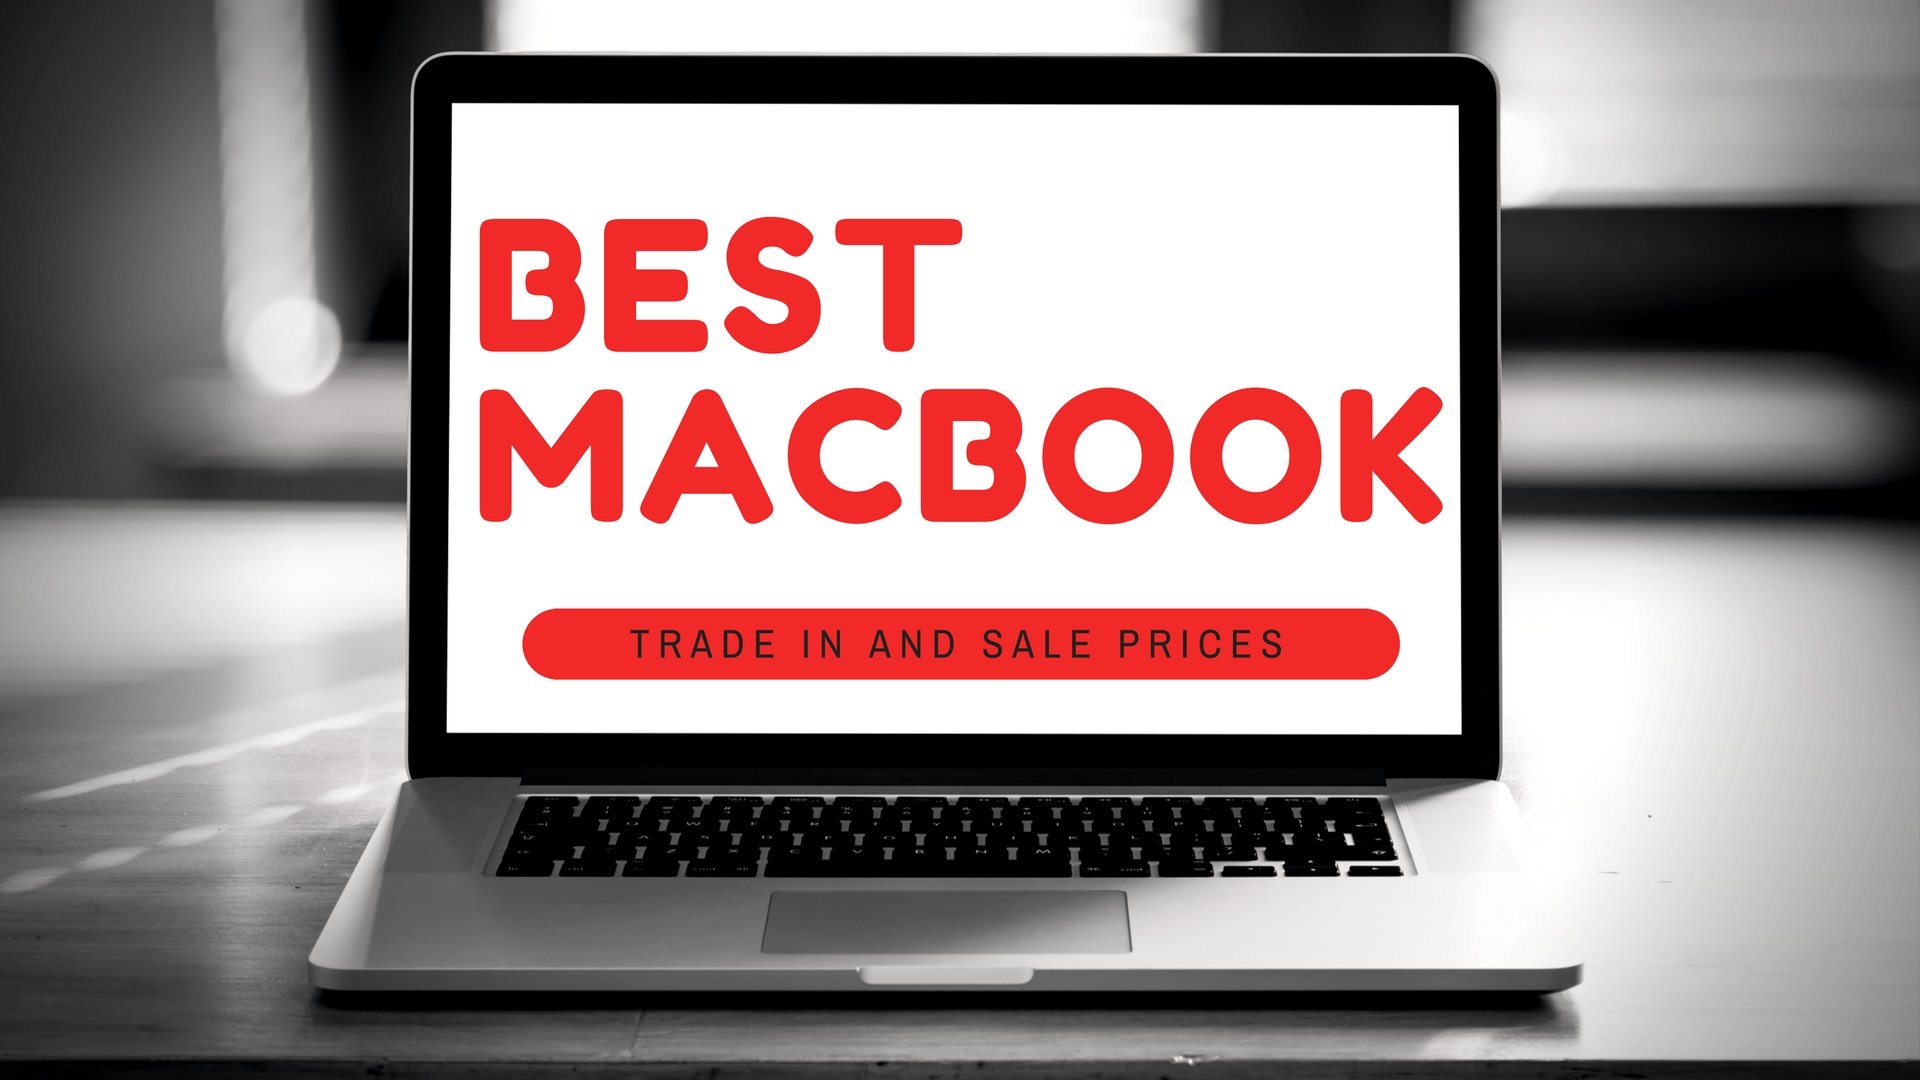 What you need to know about trading or selling your MacBook, MacBook Air or MacBook Pro.